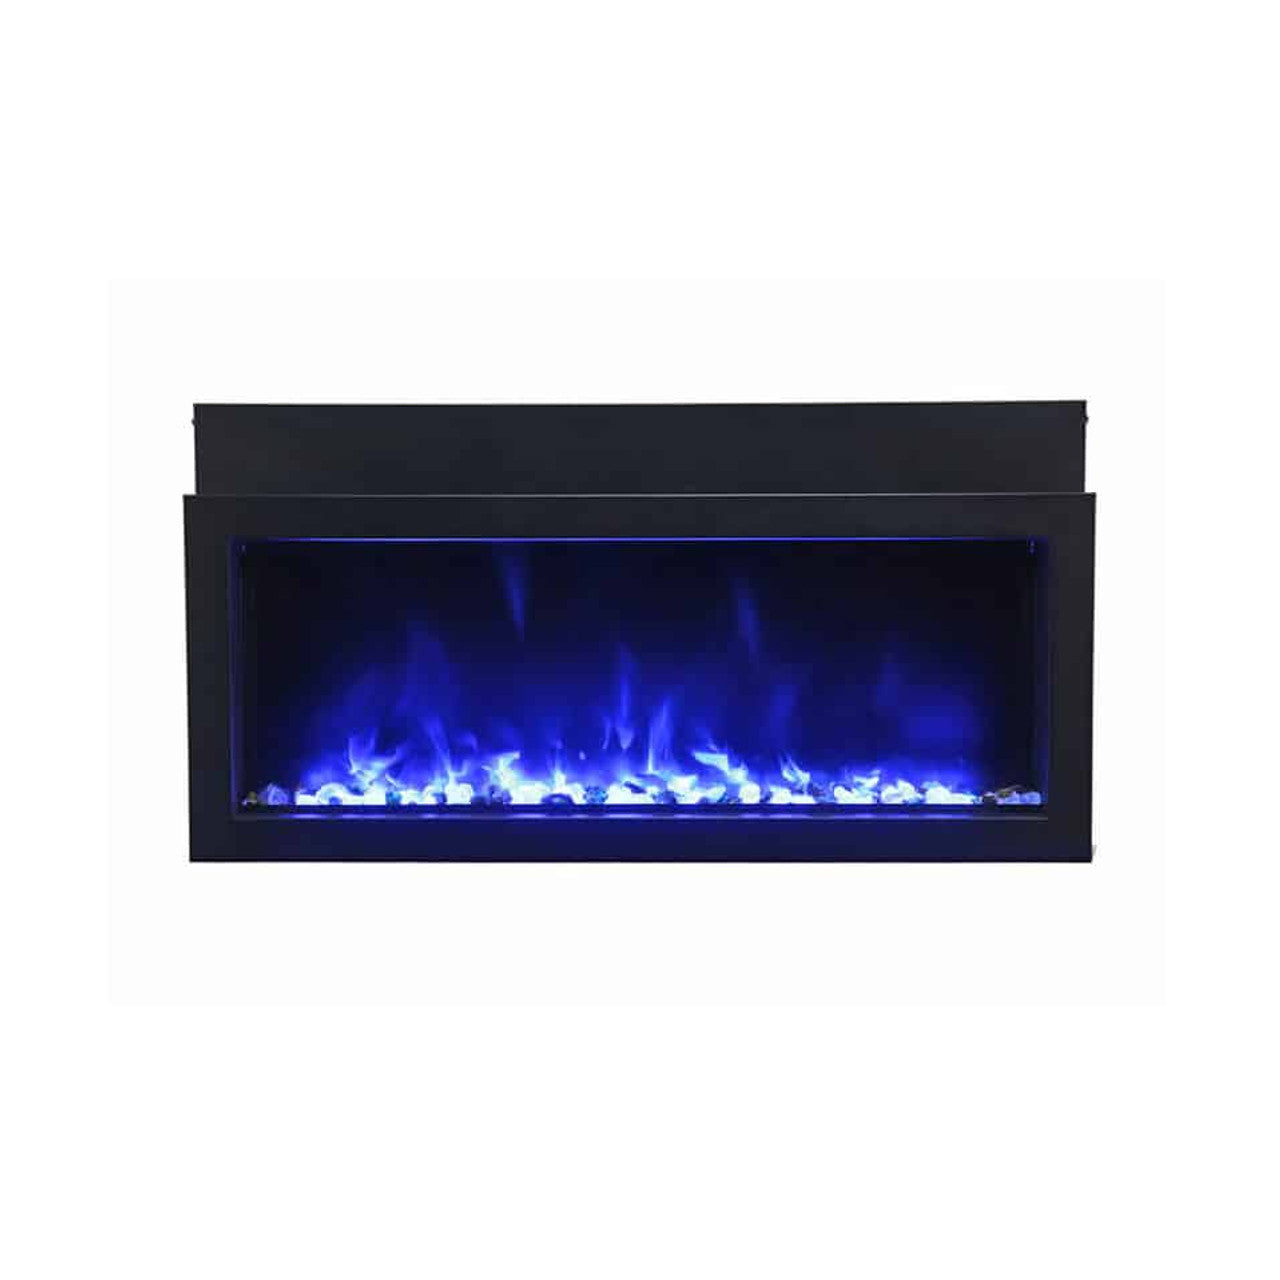 Amantii 50" Panorama Extra Slim Electric Fireplace -BI-50-XTRASLIM- Front View With Fire Glass Blue Flame